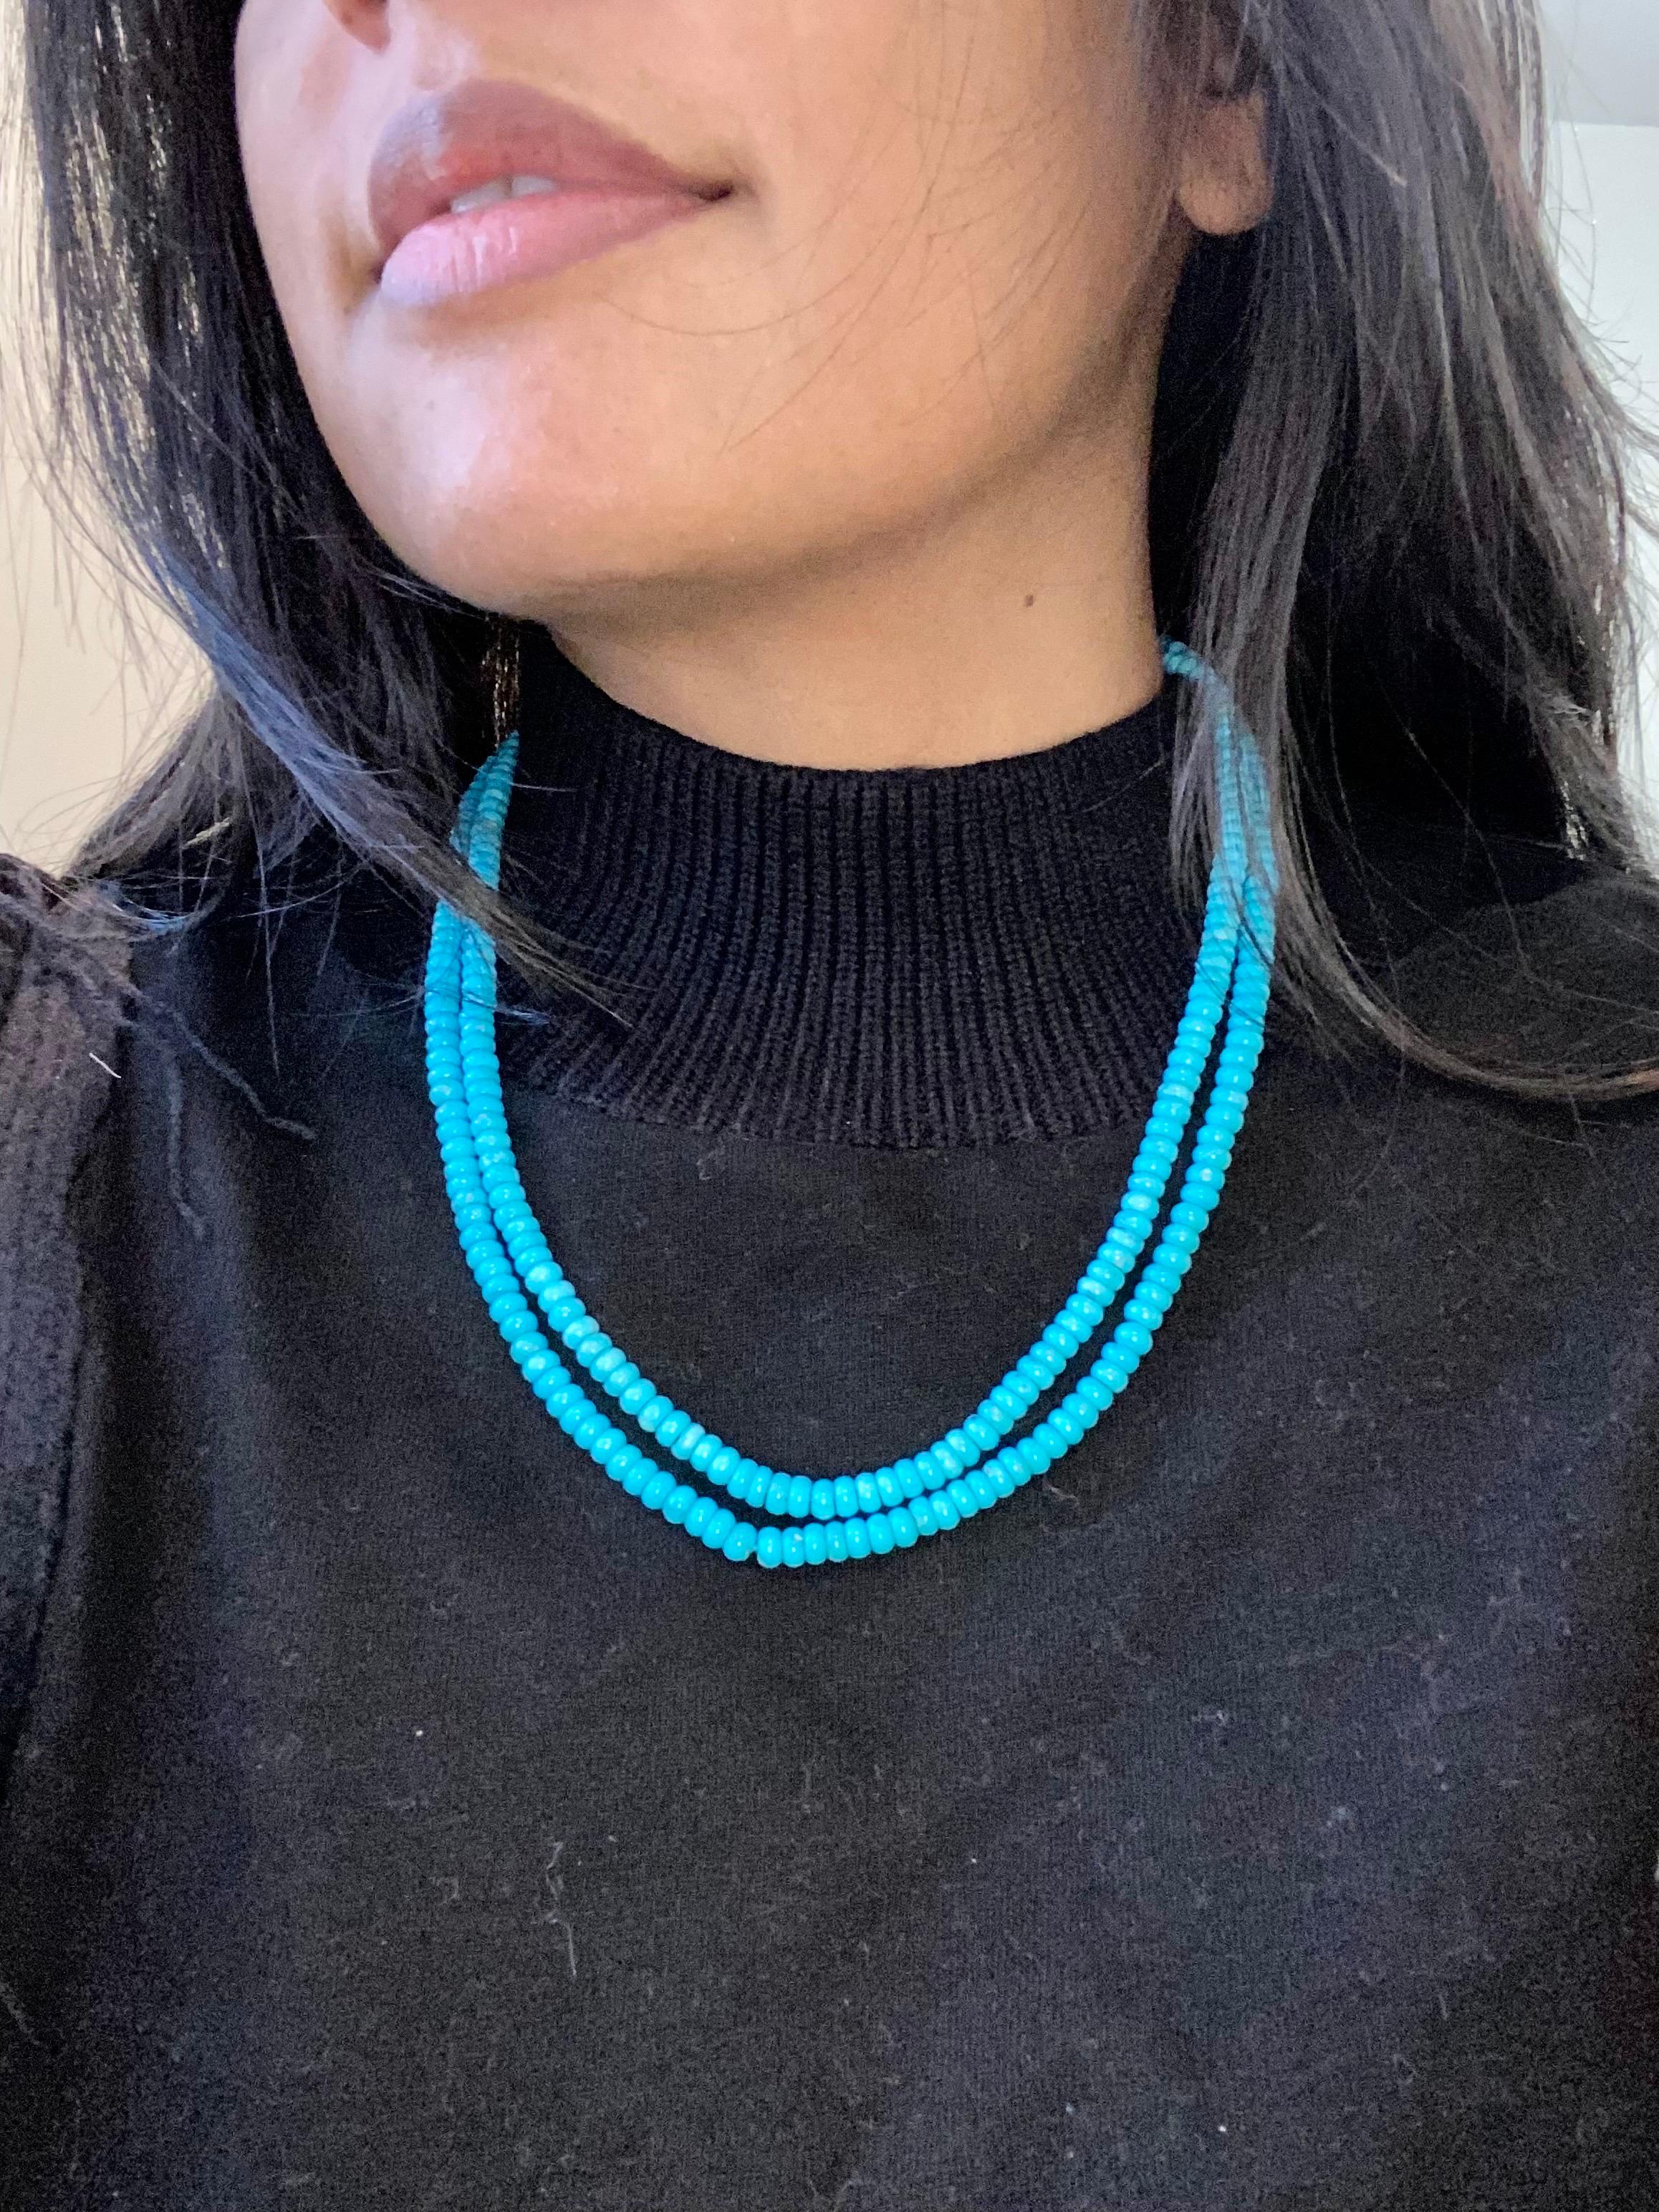 215 Carat Natural Sleeping Beauty Turquoise Necklace, Two Strand 14 Karat Gold
Natural Sleeping Beauty Turquoise which is very hard to find now.
Necklace has 2 strand
Approximately 5 mm each bead
14 Karat  Yellow gold clasp
20 Inches long
Please